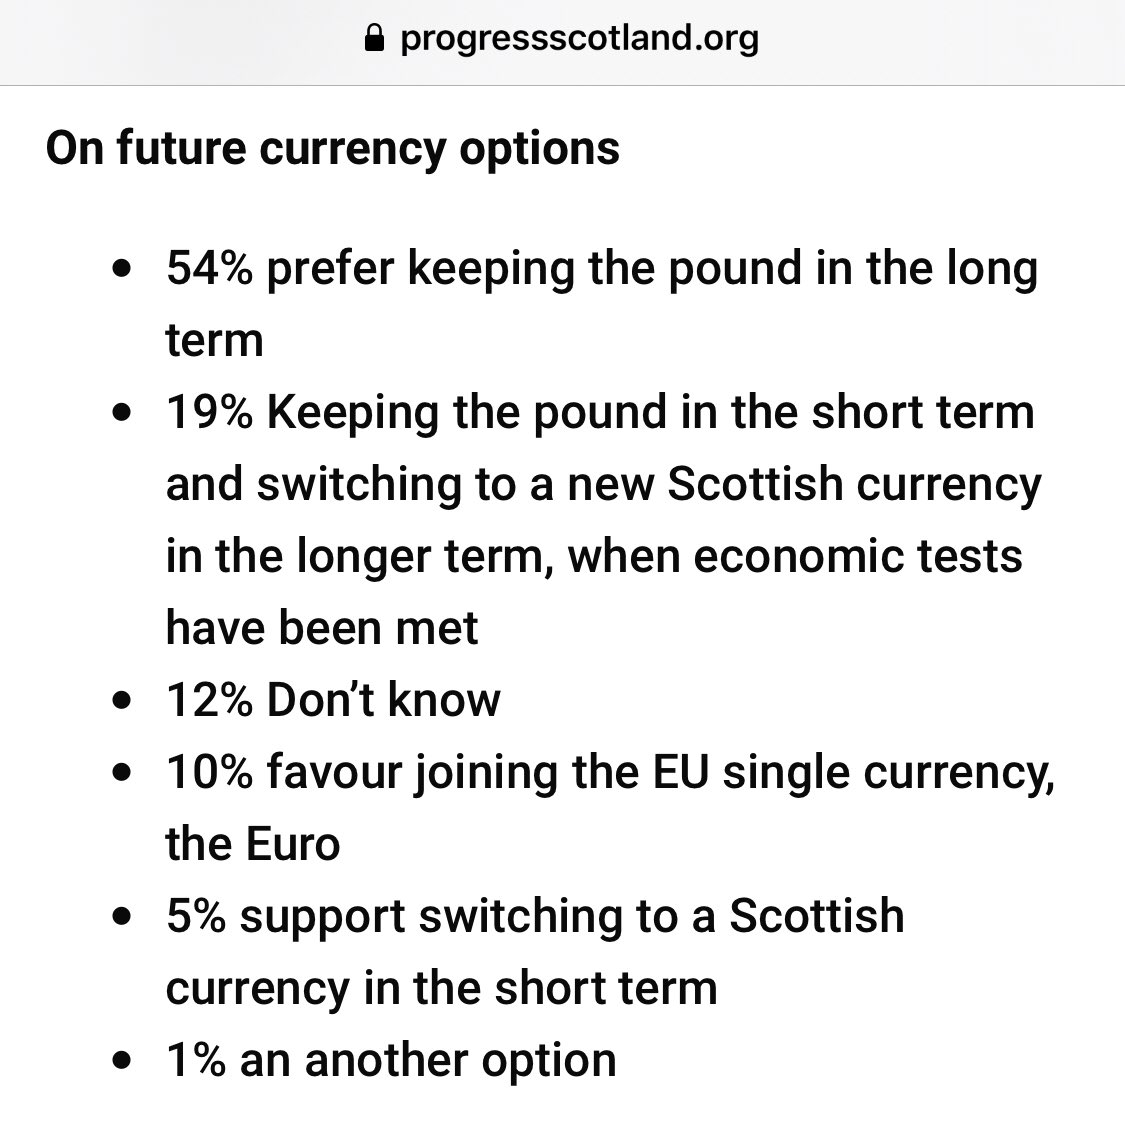 and the fact that only 10% favour joining the Euro shows how brittle the “Vote Yes to be independent and join the EU” argument is (4/n)